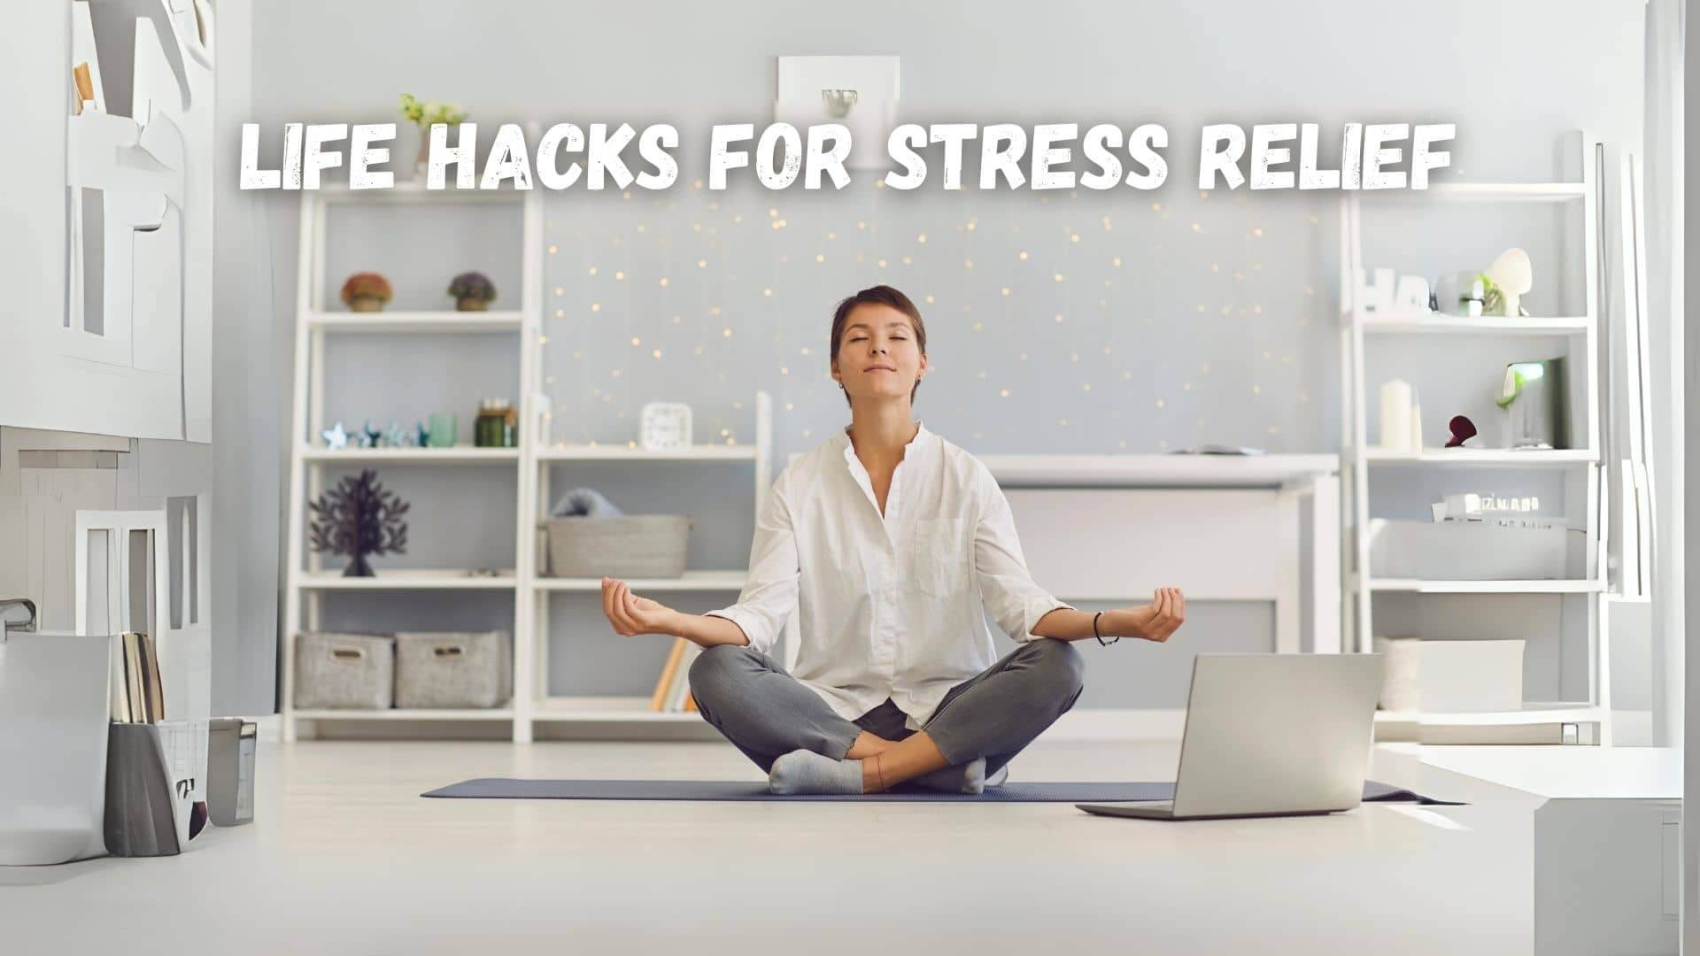 Life Hacks for Stress Relief